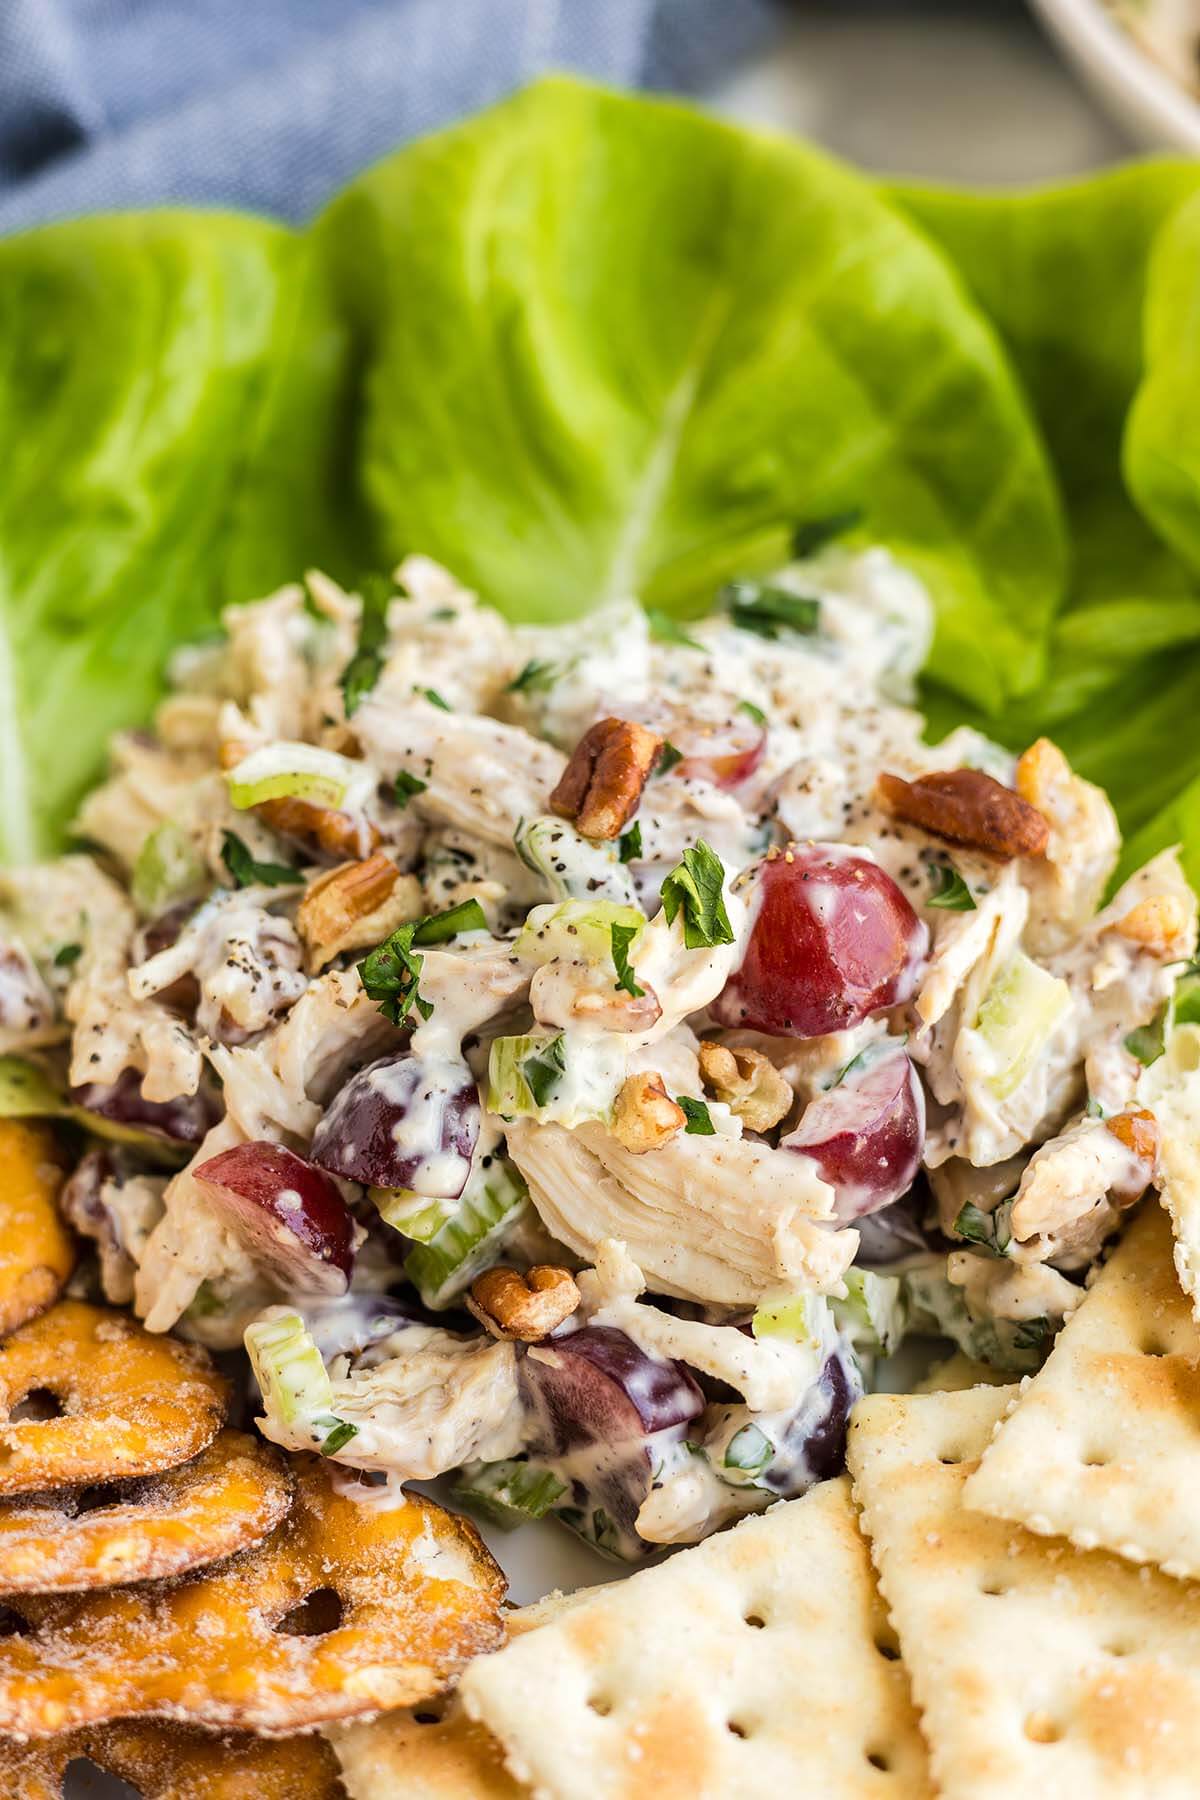 Chicken salad with grapes, pecans, and herbs served in a lettuce wrap, accompanied by golden-brown crackers.